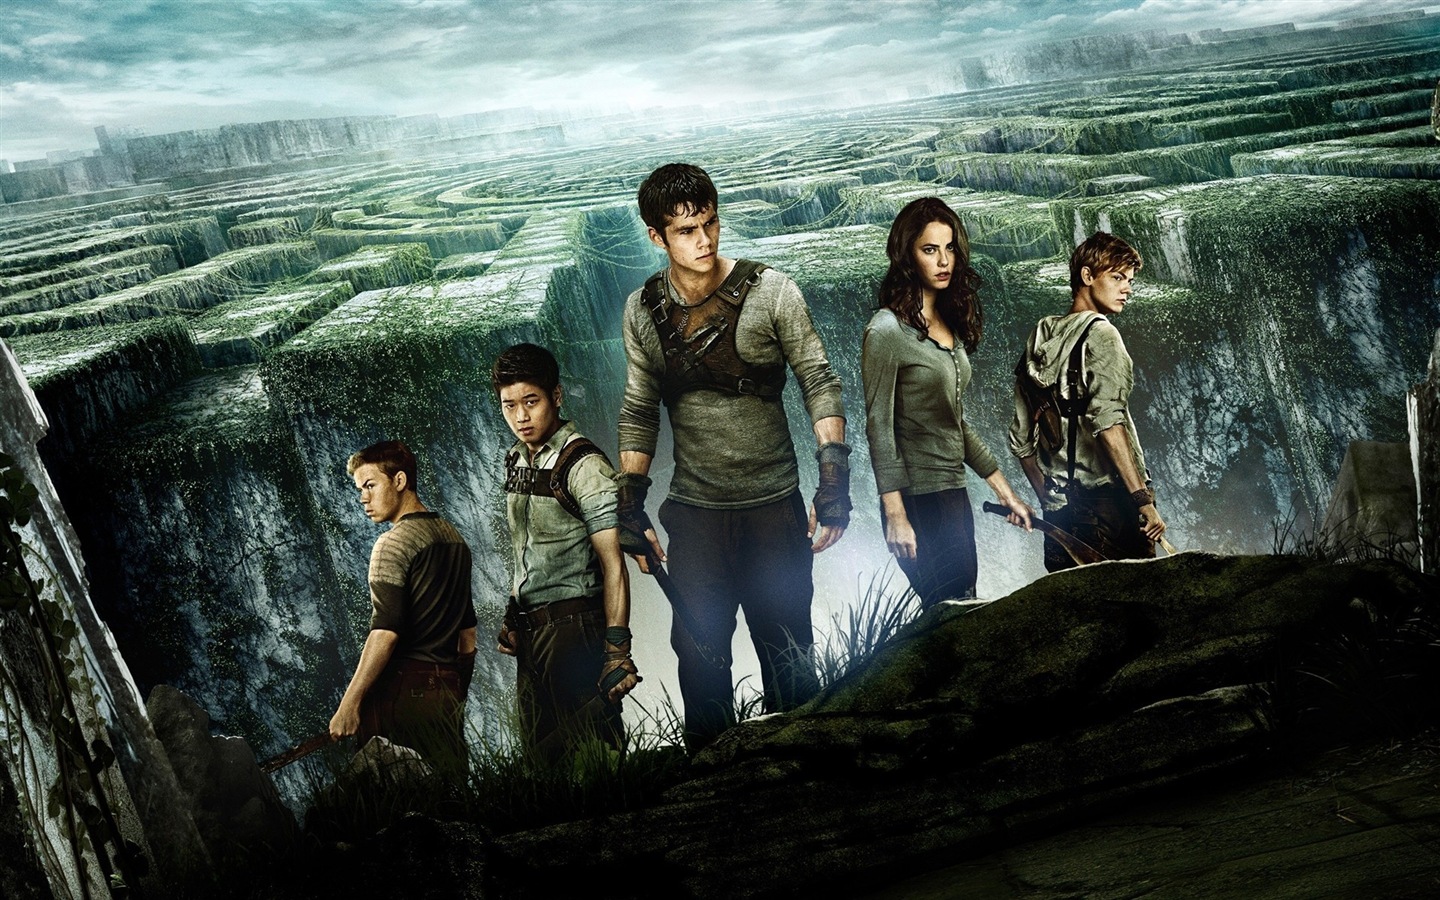 The Maze Runner HD movie wallpapers #1 - 1440x900